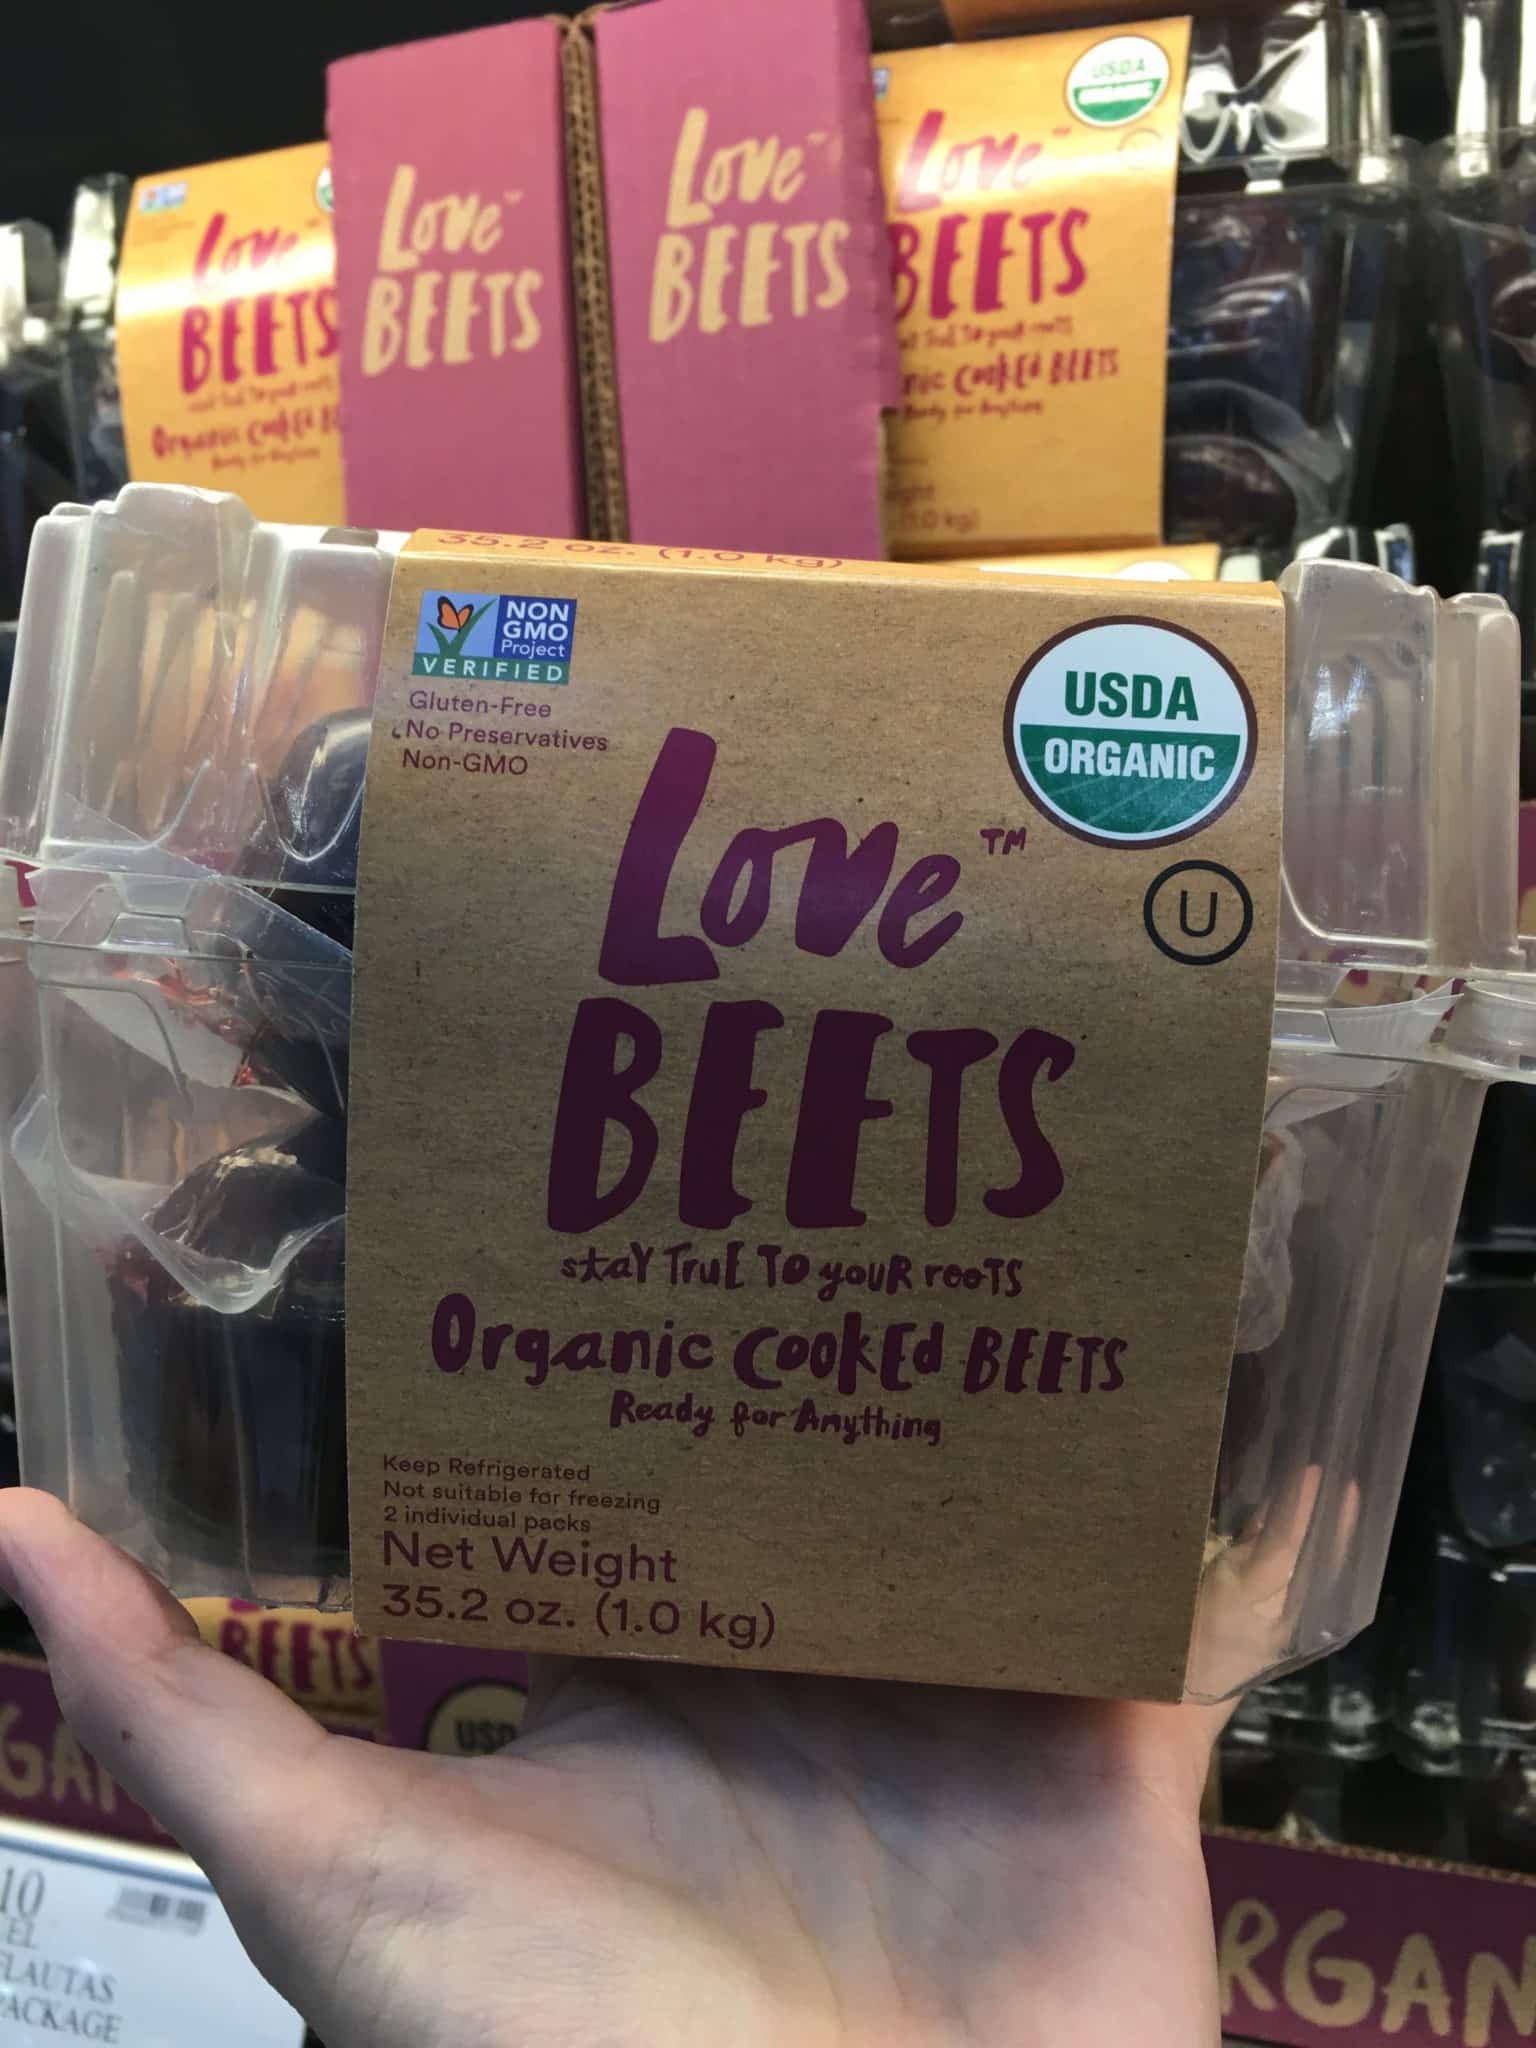 Love Beets from Costco